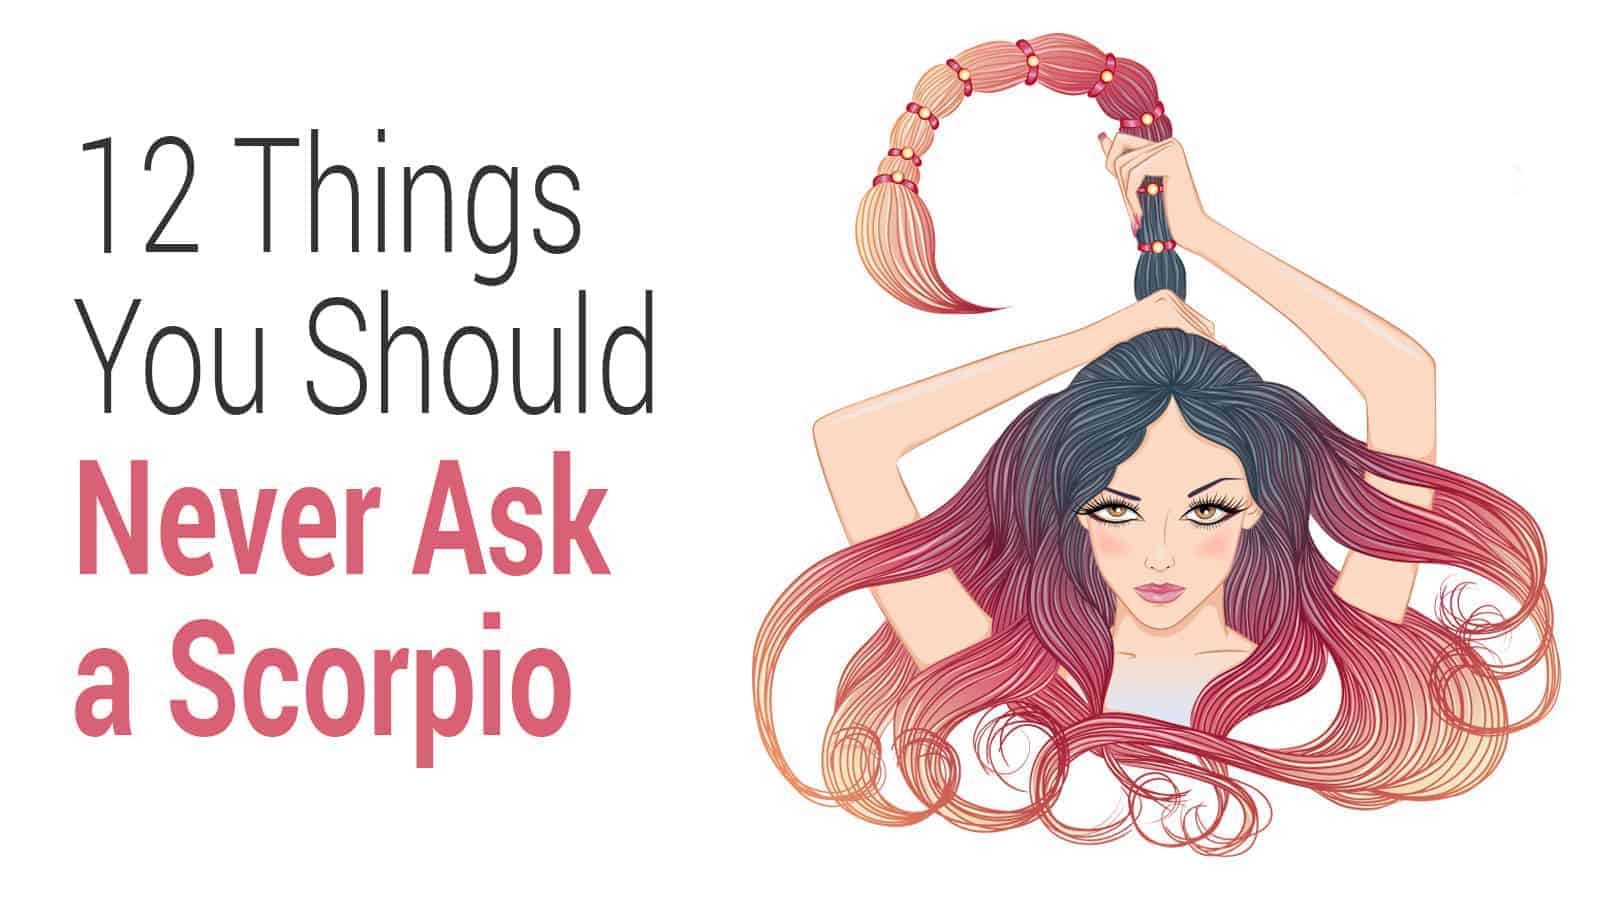 12 Things You Should Never Ask a Scorpio.